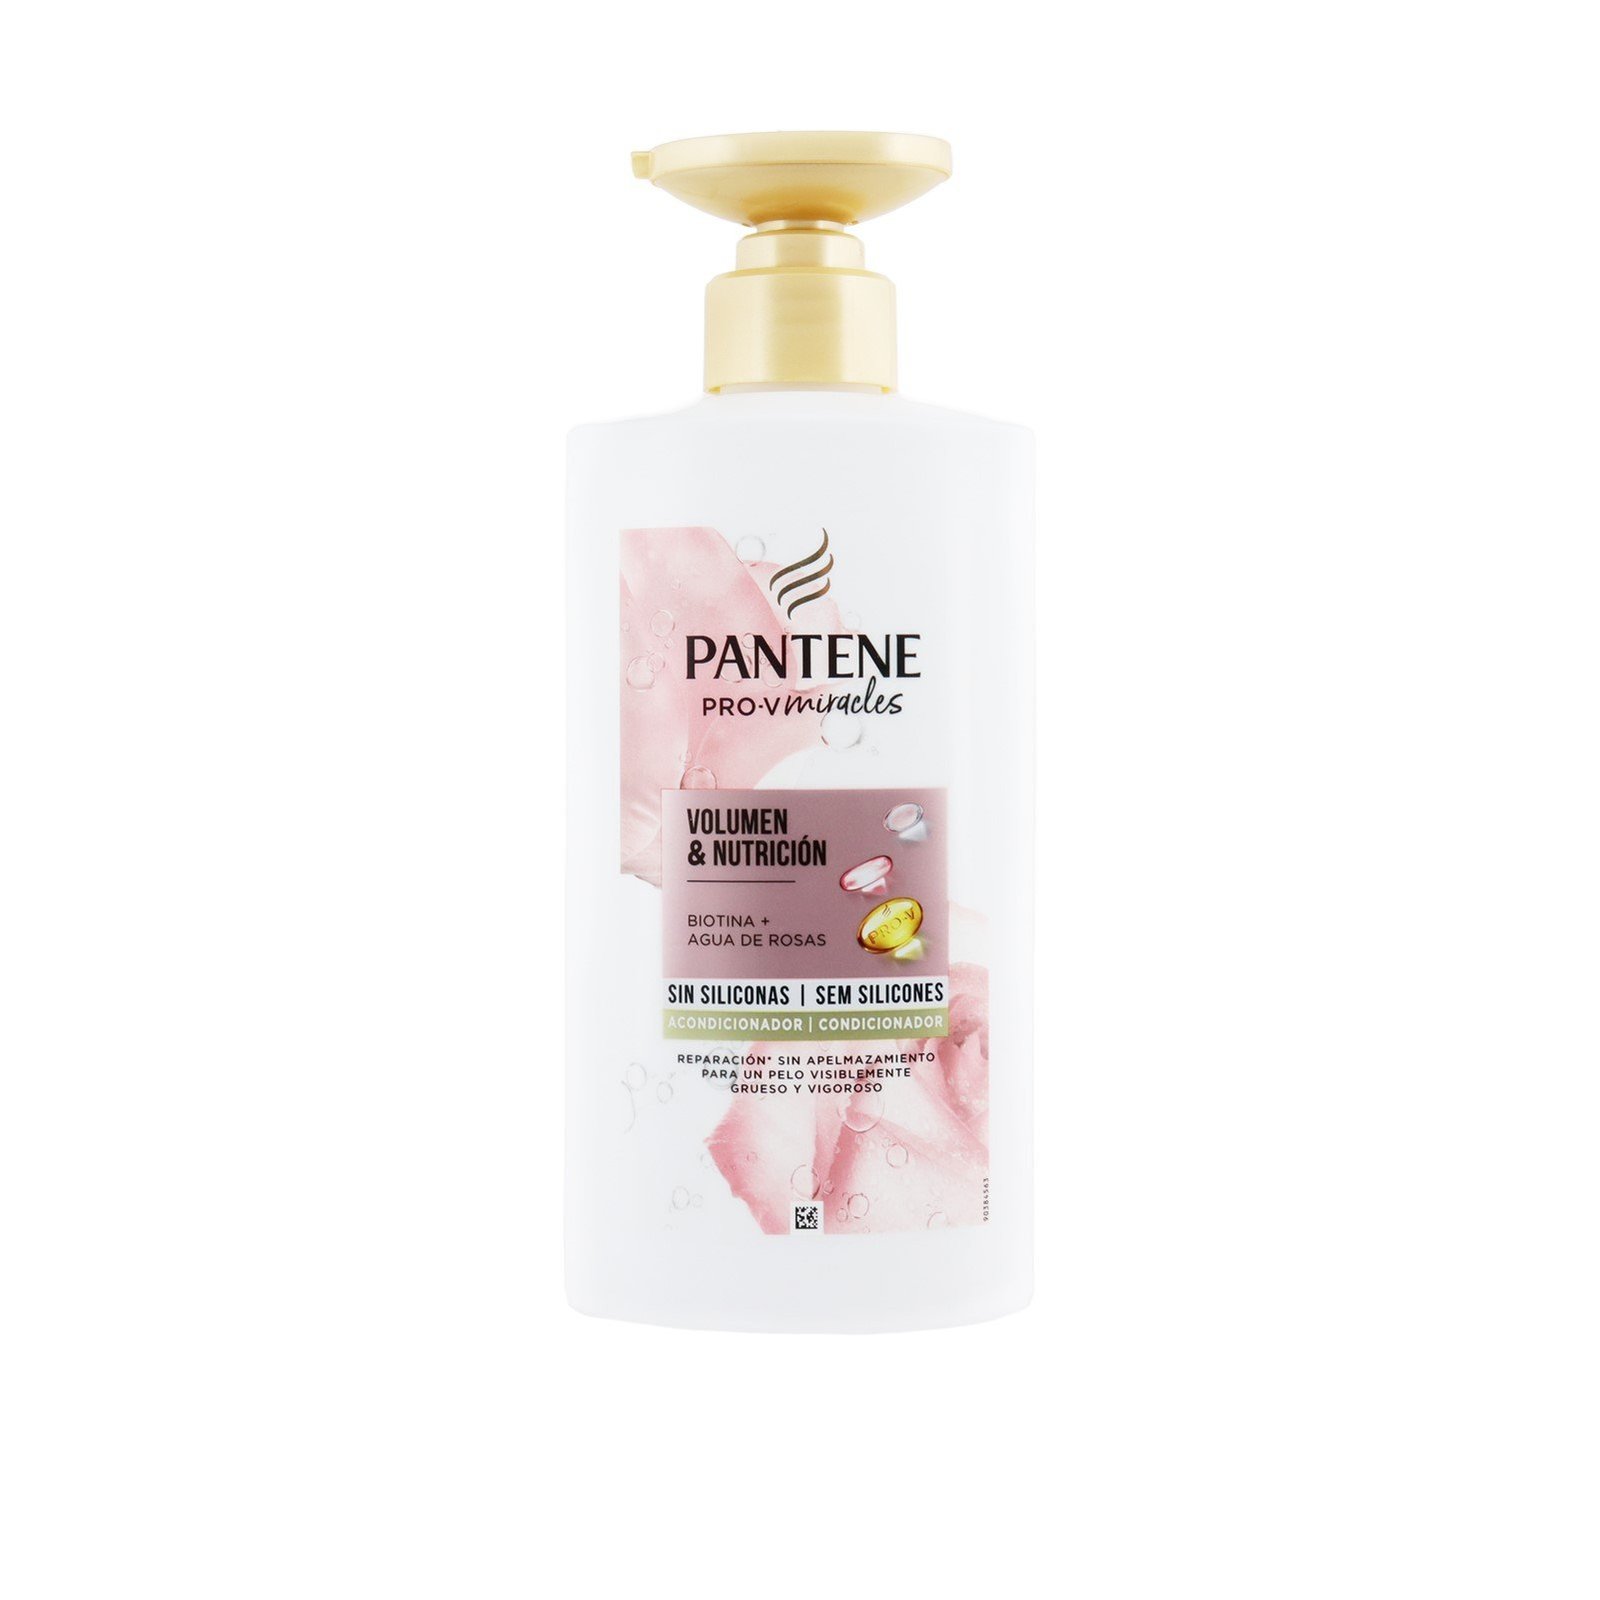 Pantene Pro-V Miracles Lift'n'Volume Silicone Free Conditioner 460ml (15.5 fl oz)